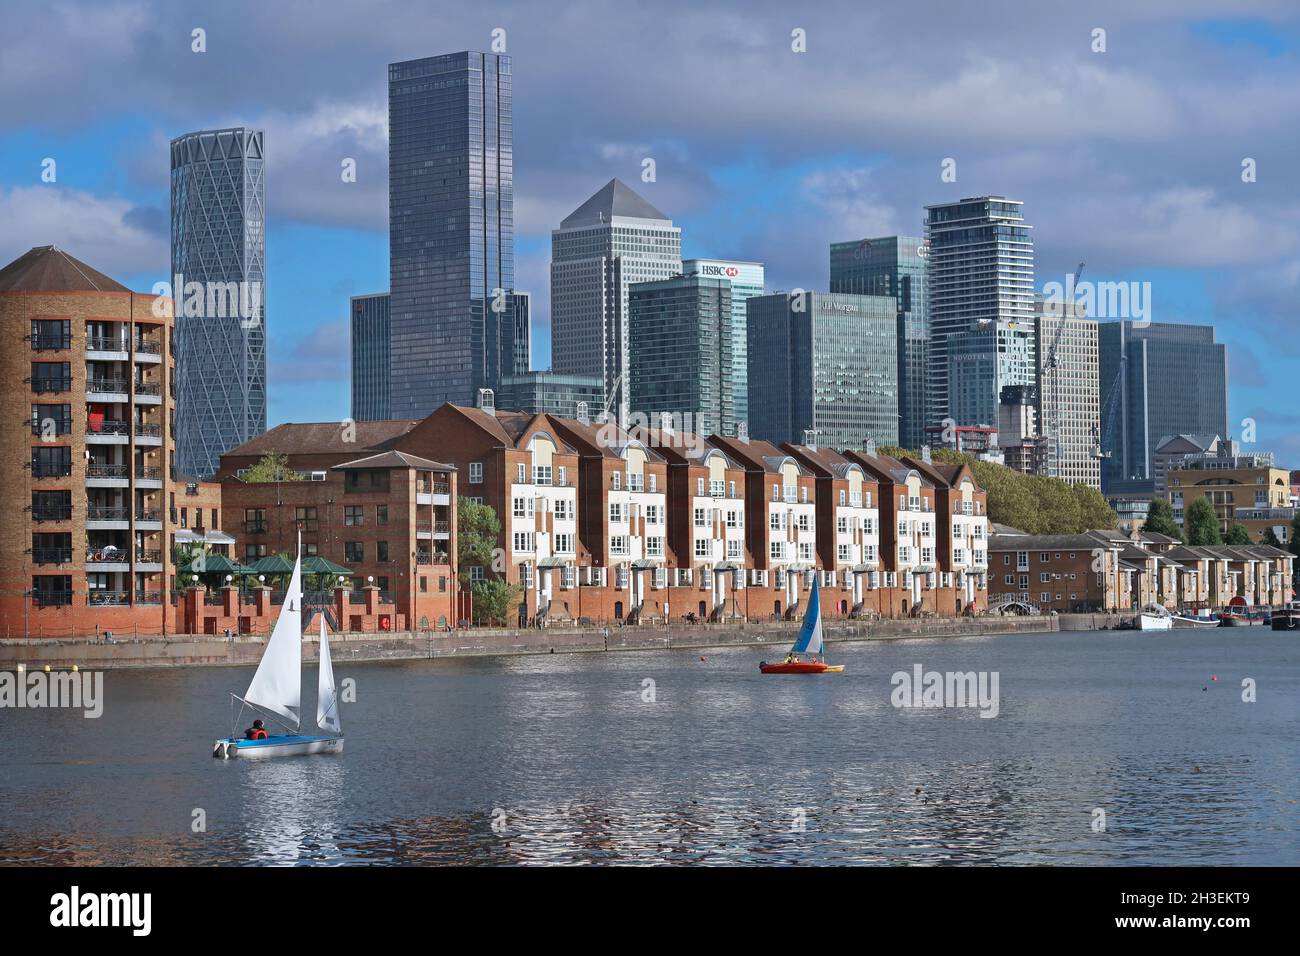 Sailing dingys from Greenland Dock Watersports Centre on Greenland Dock, part of the old Surrey Docks in Rotherhithe, London, UK. Canary Wharf beyond. Stock Photo